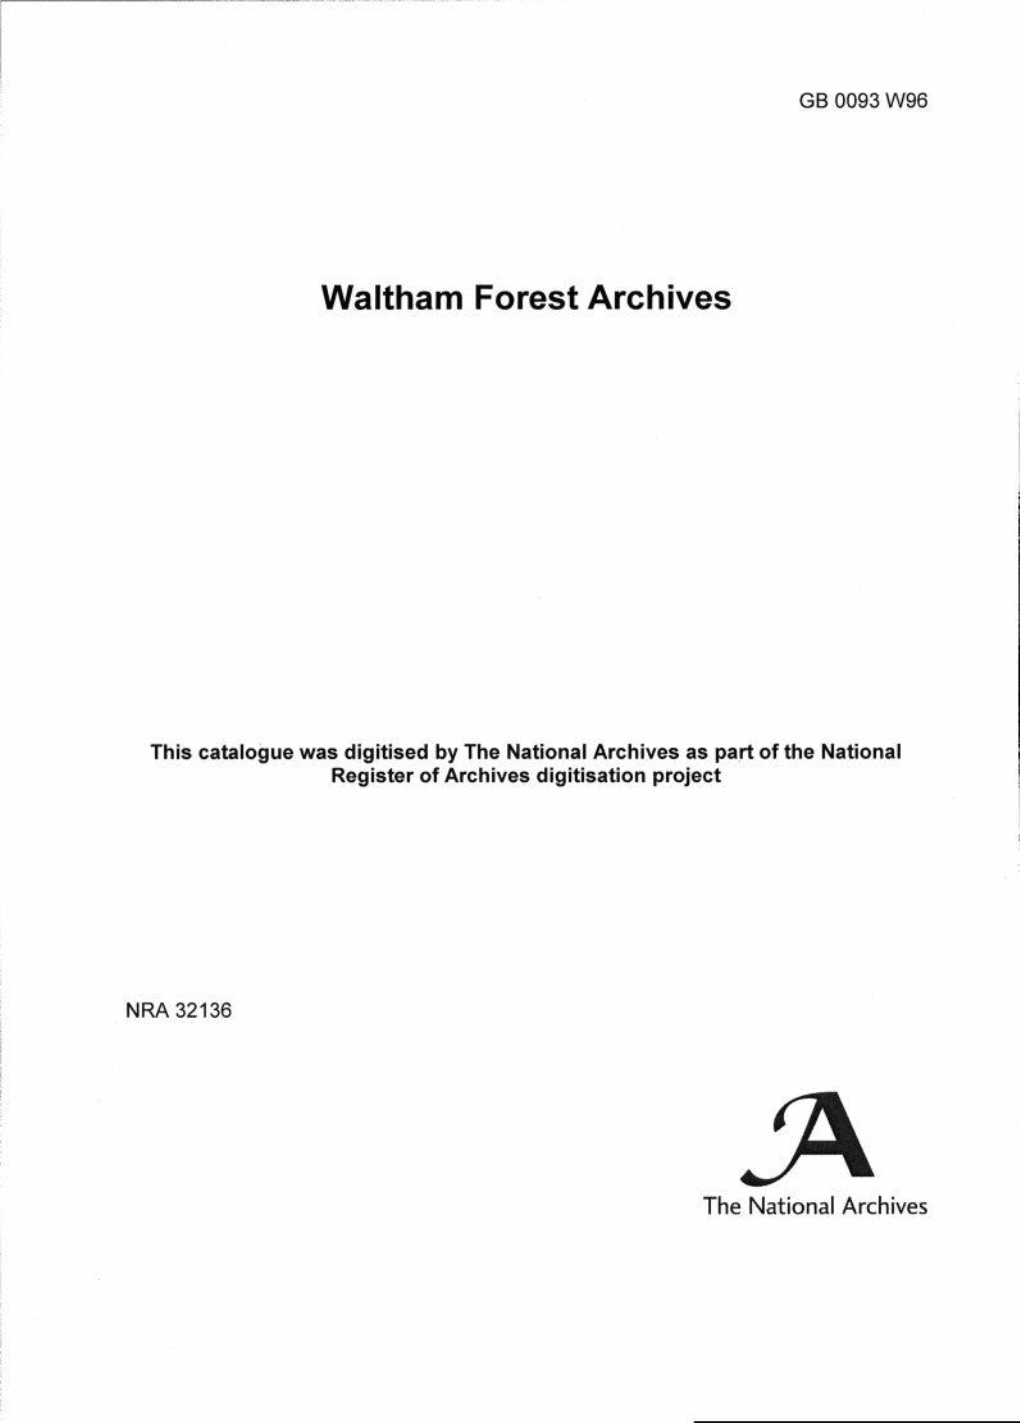 Waltham Forest Archives